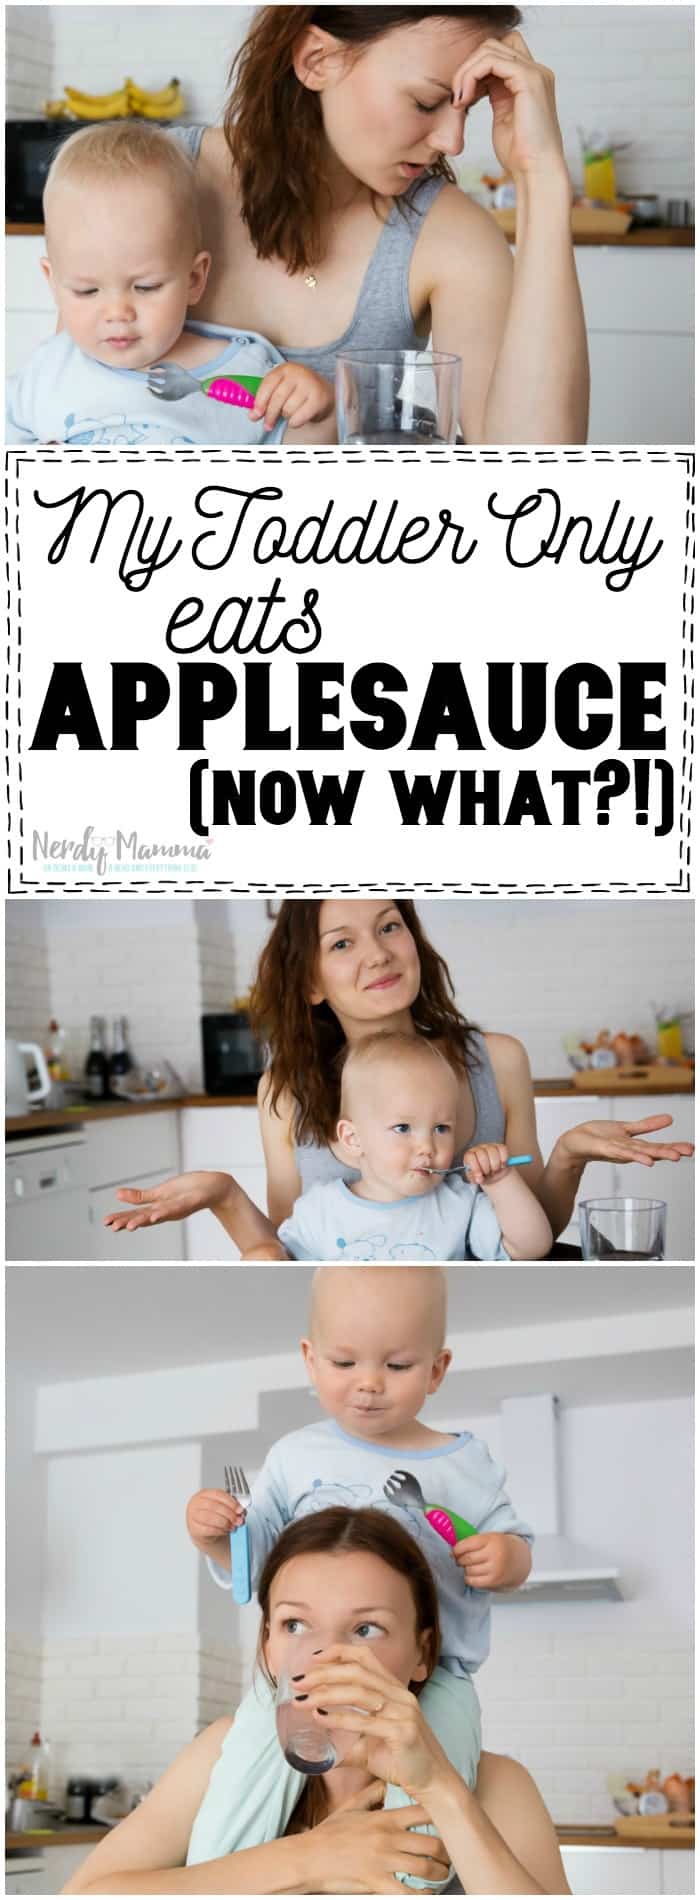 This mom has ZERO luck getting her kid to eat anything besides applesauce until she reads this one book...